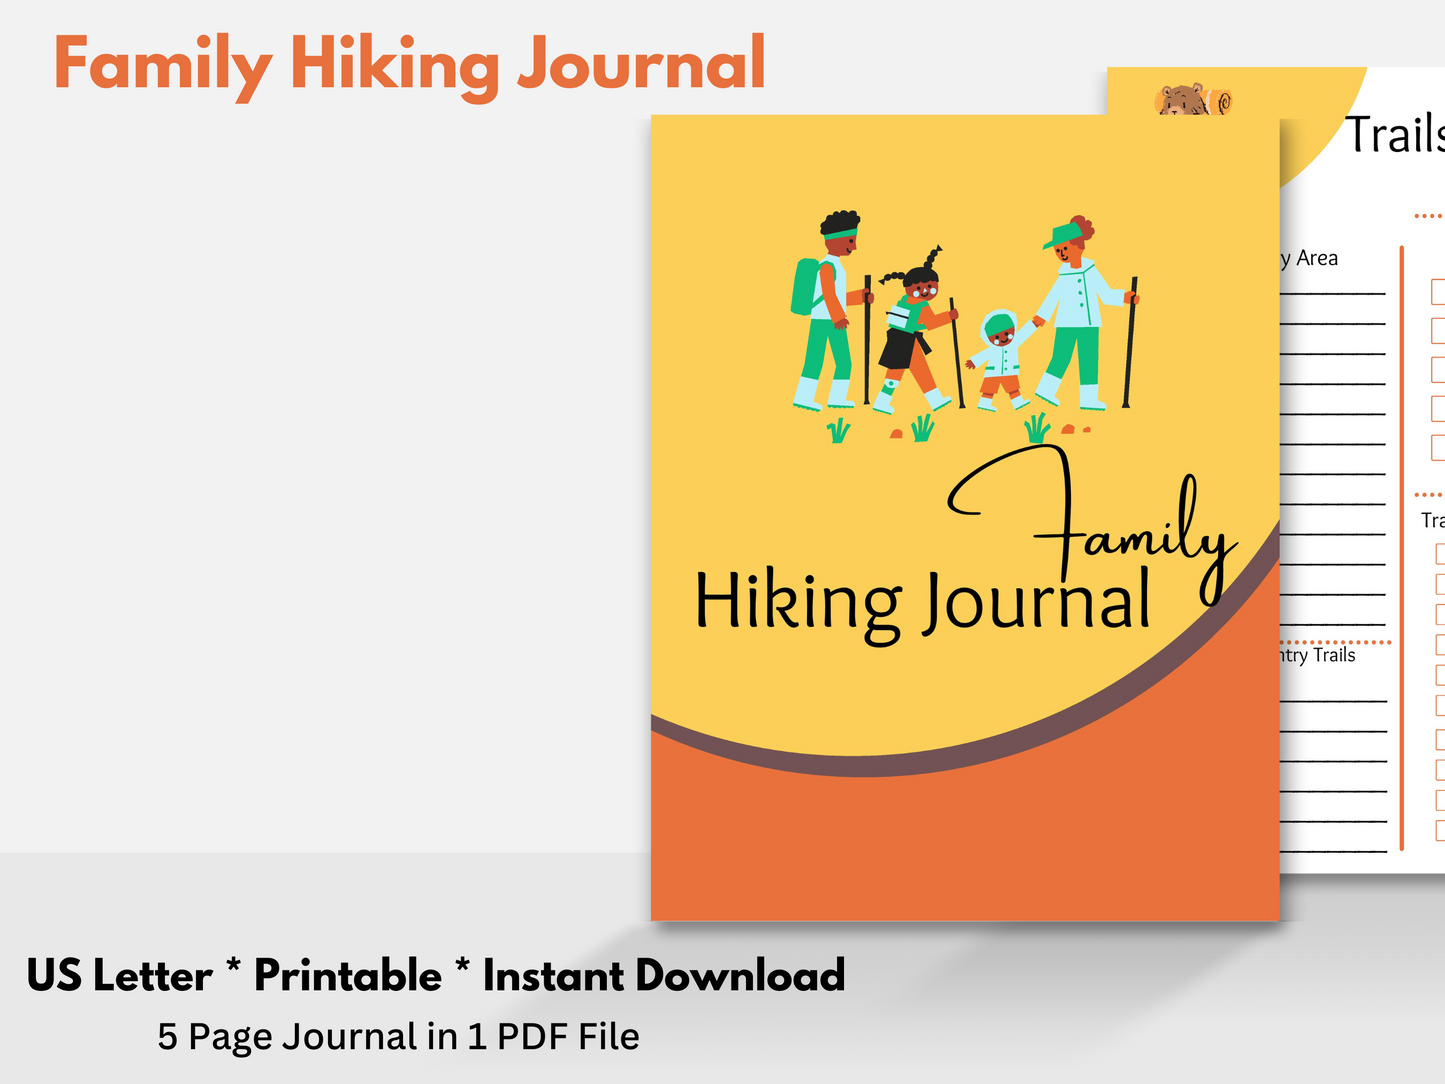 A family hiking journal pdf with a yellow and brown cover and trail page with a family on the front.